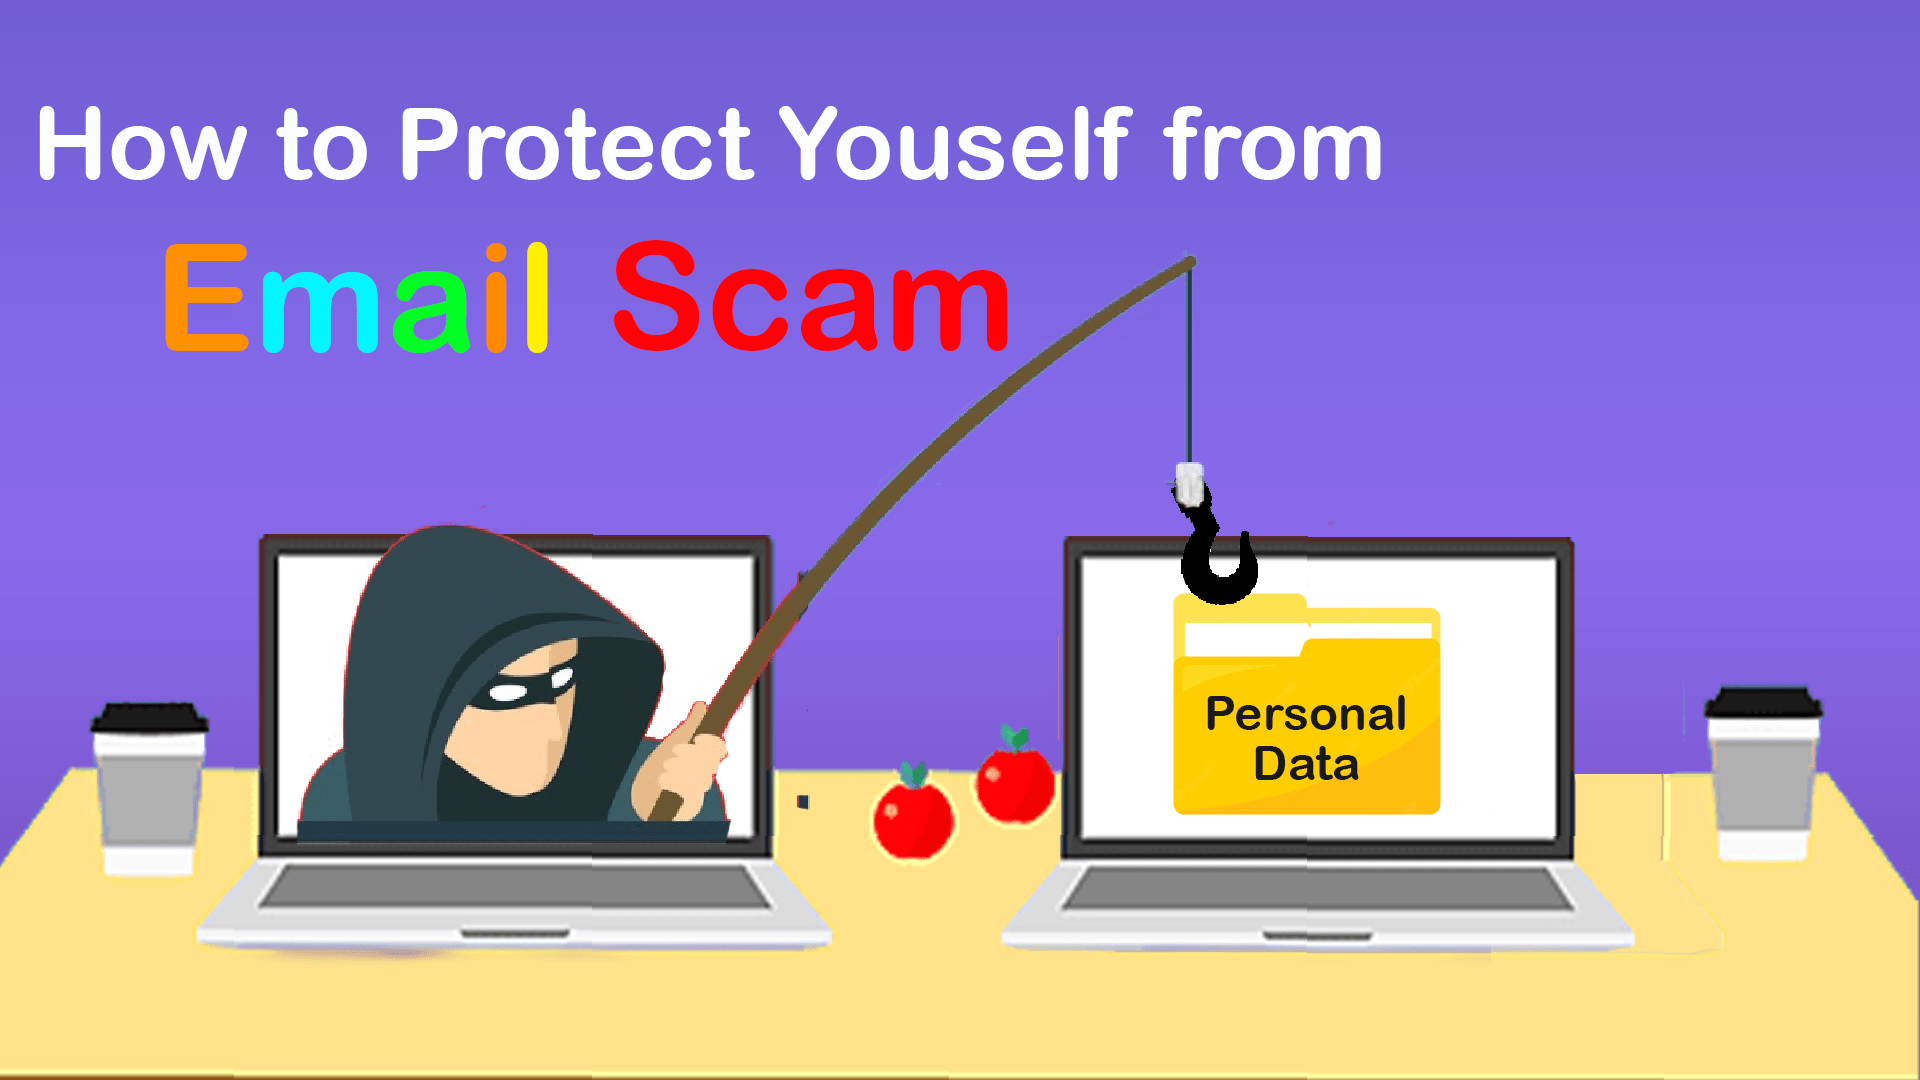 How to Protect yourself from Email Scam